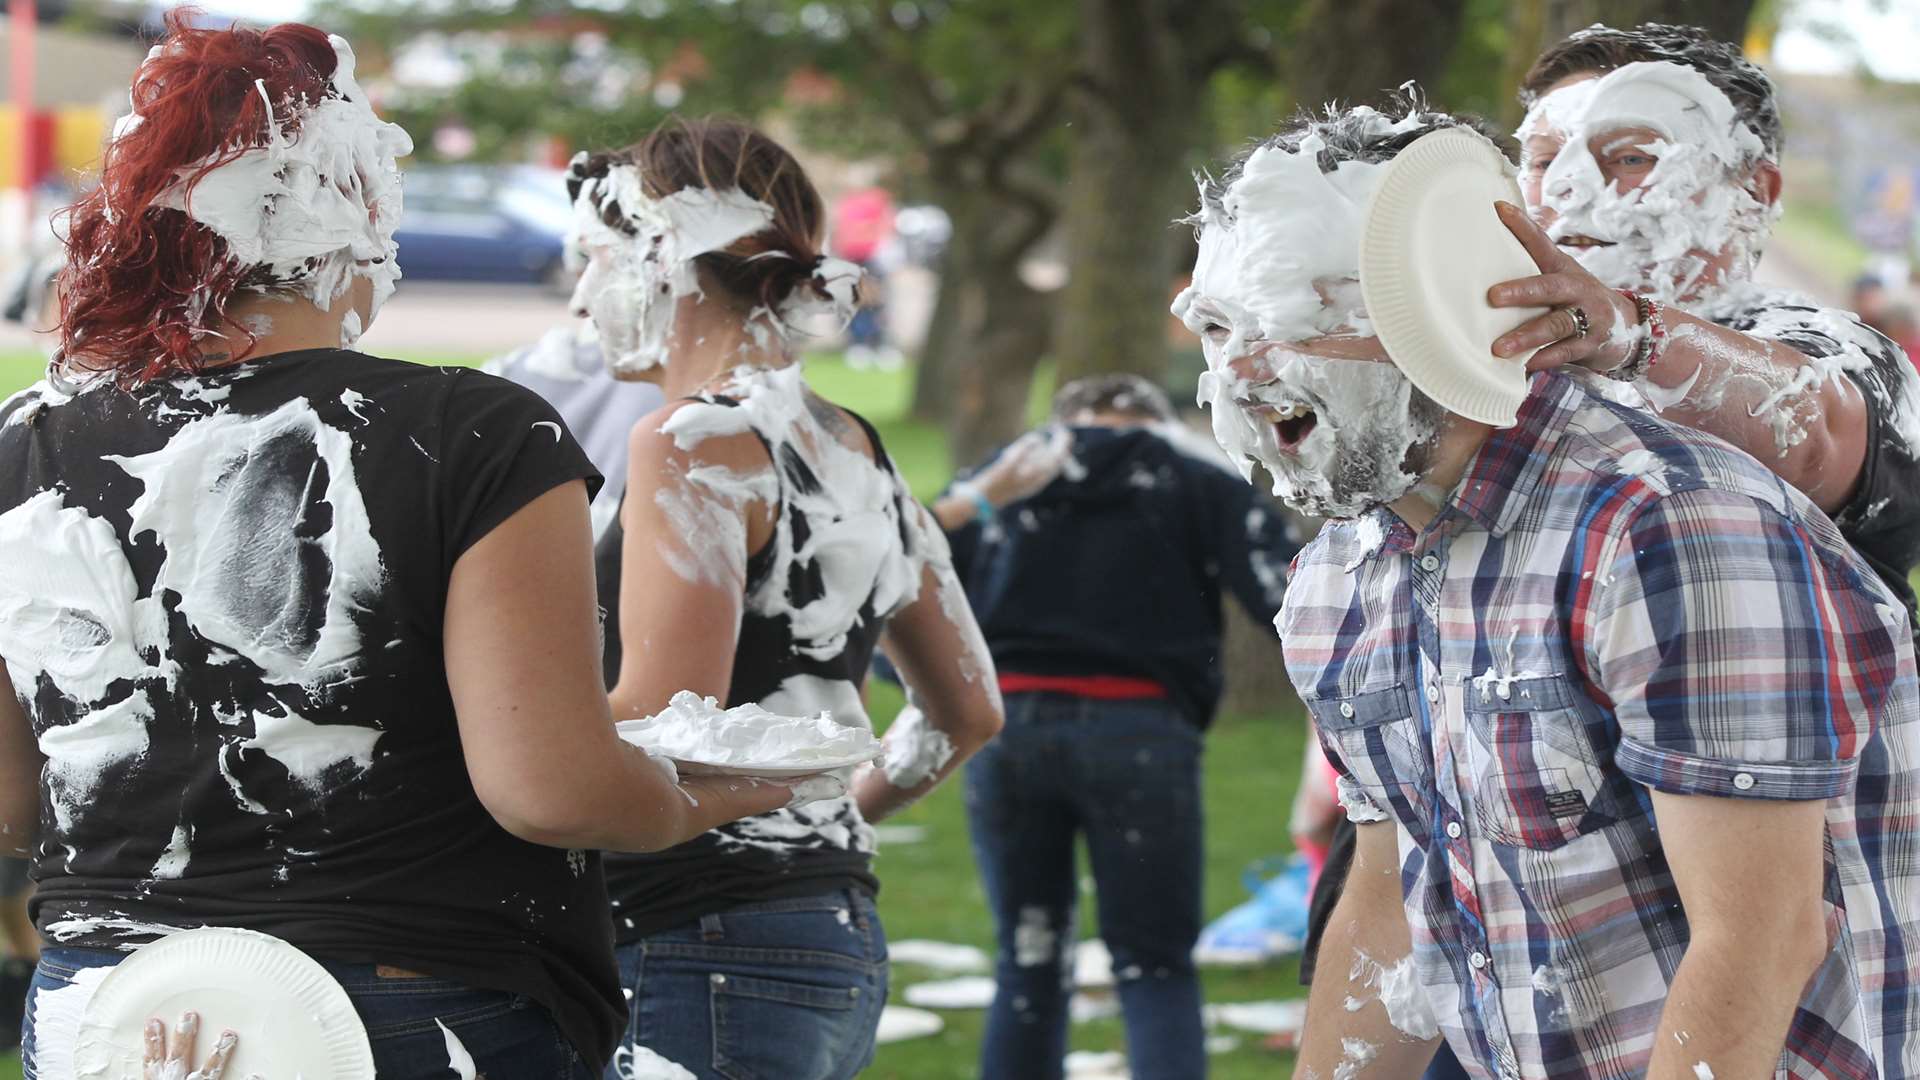 A flash mob custard pie fight for 15 minutes in Beachfields Park, as an attempt to break the world record